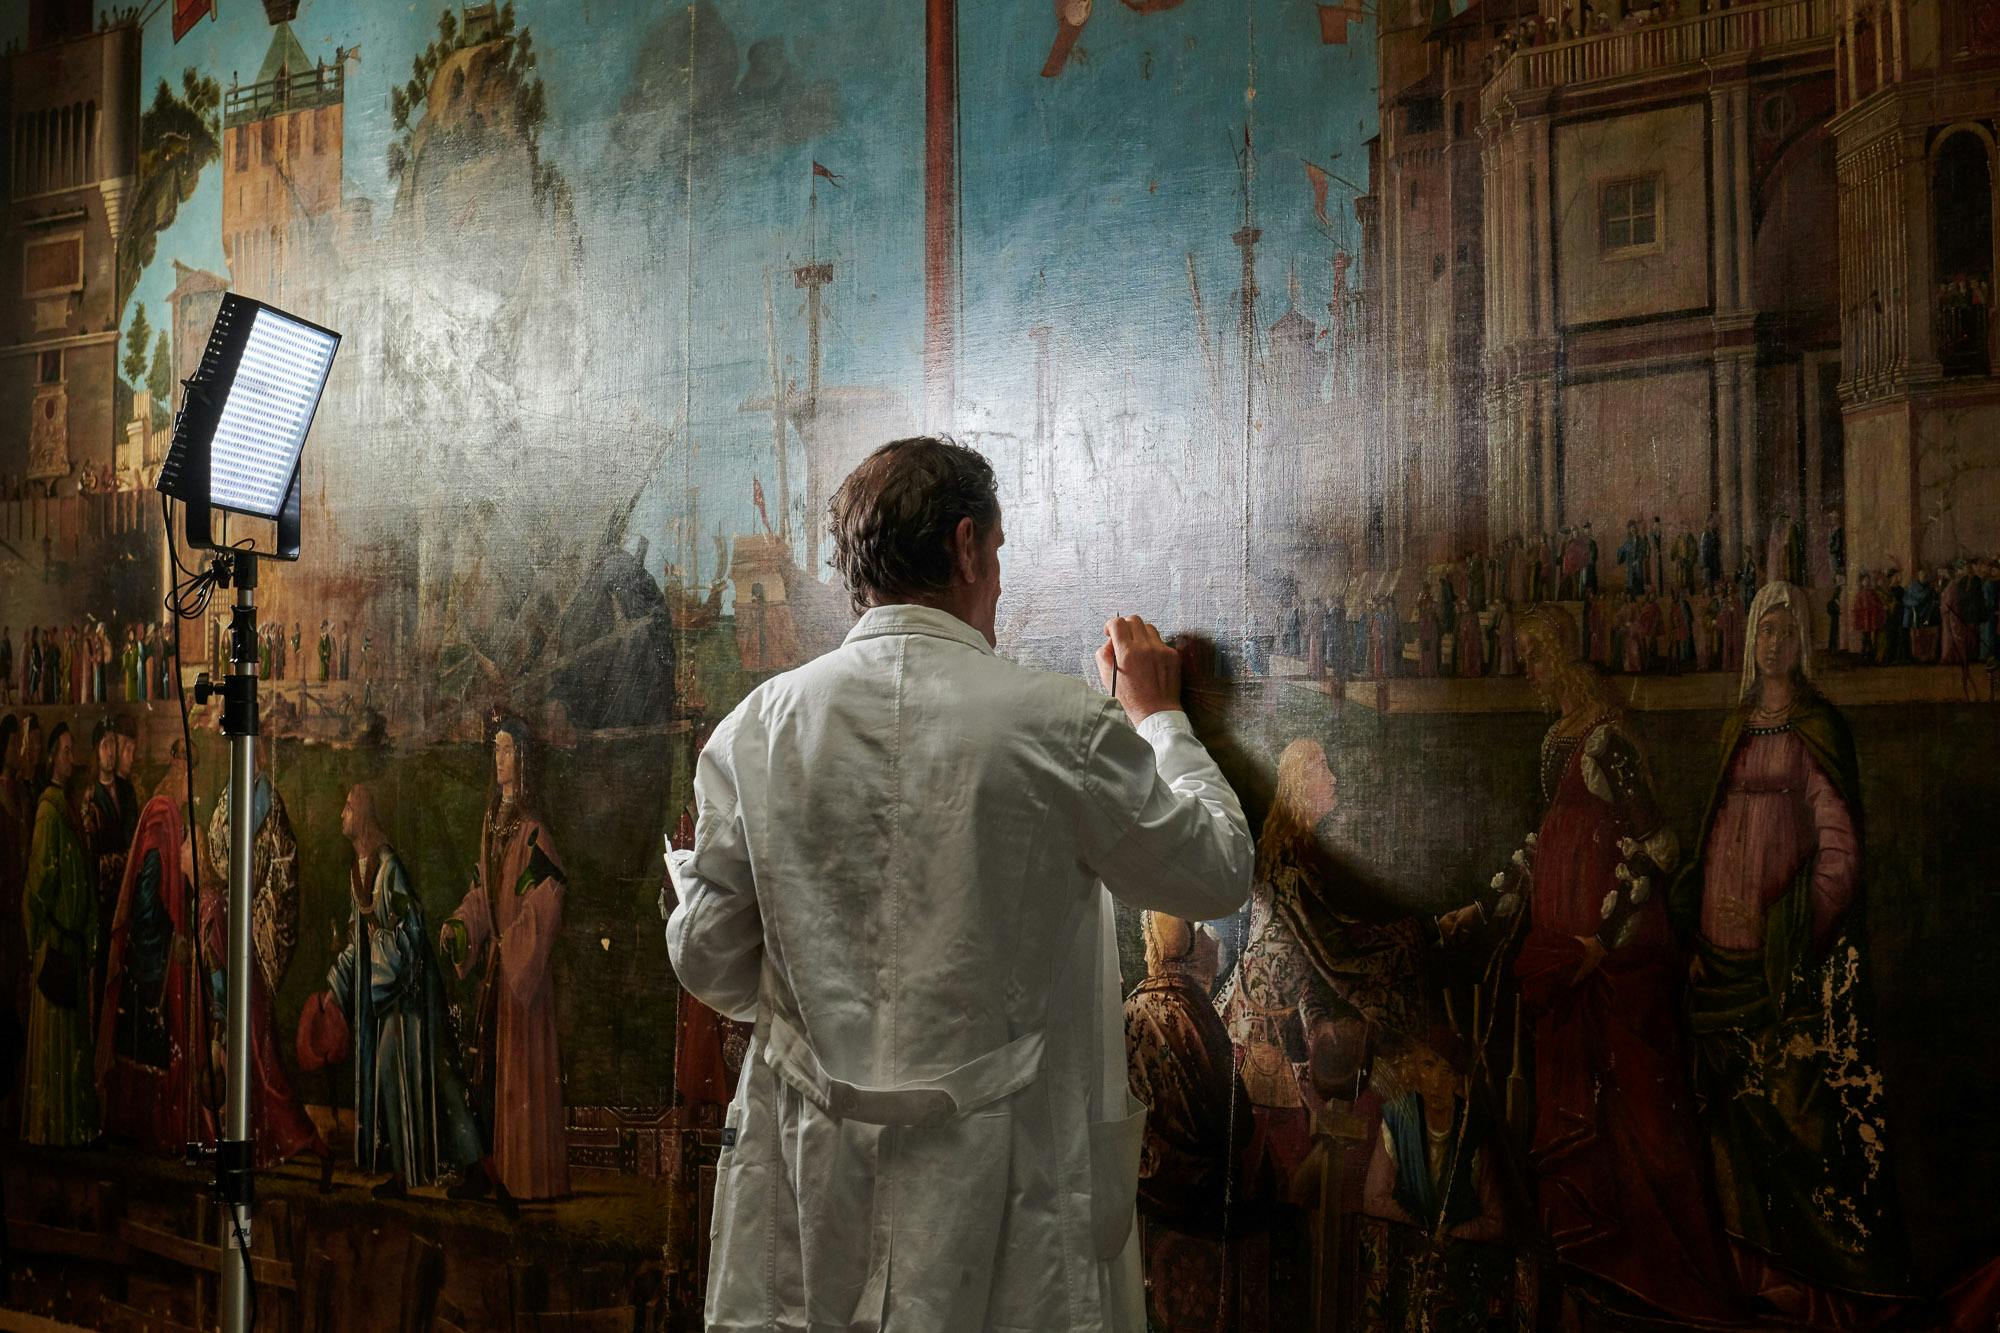 A man painting a mural